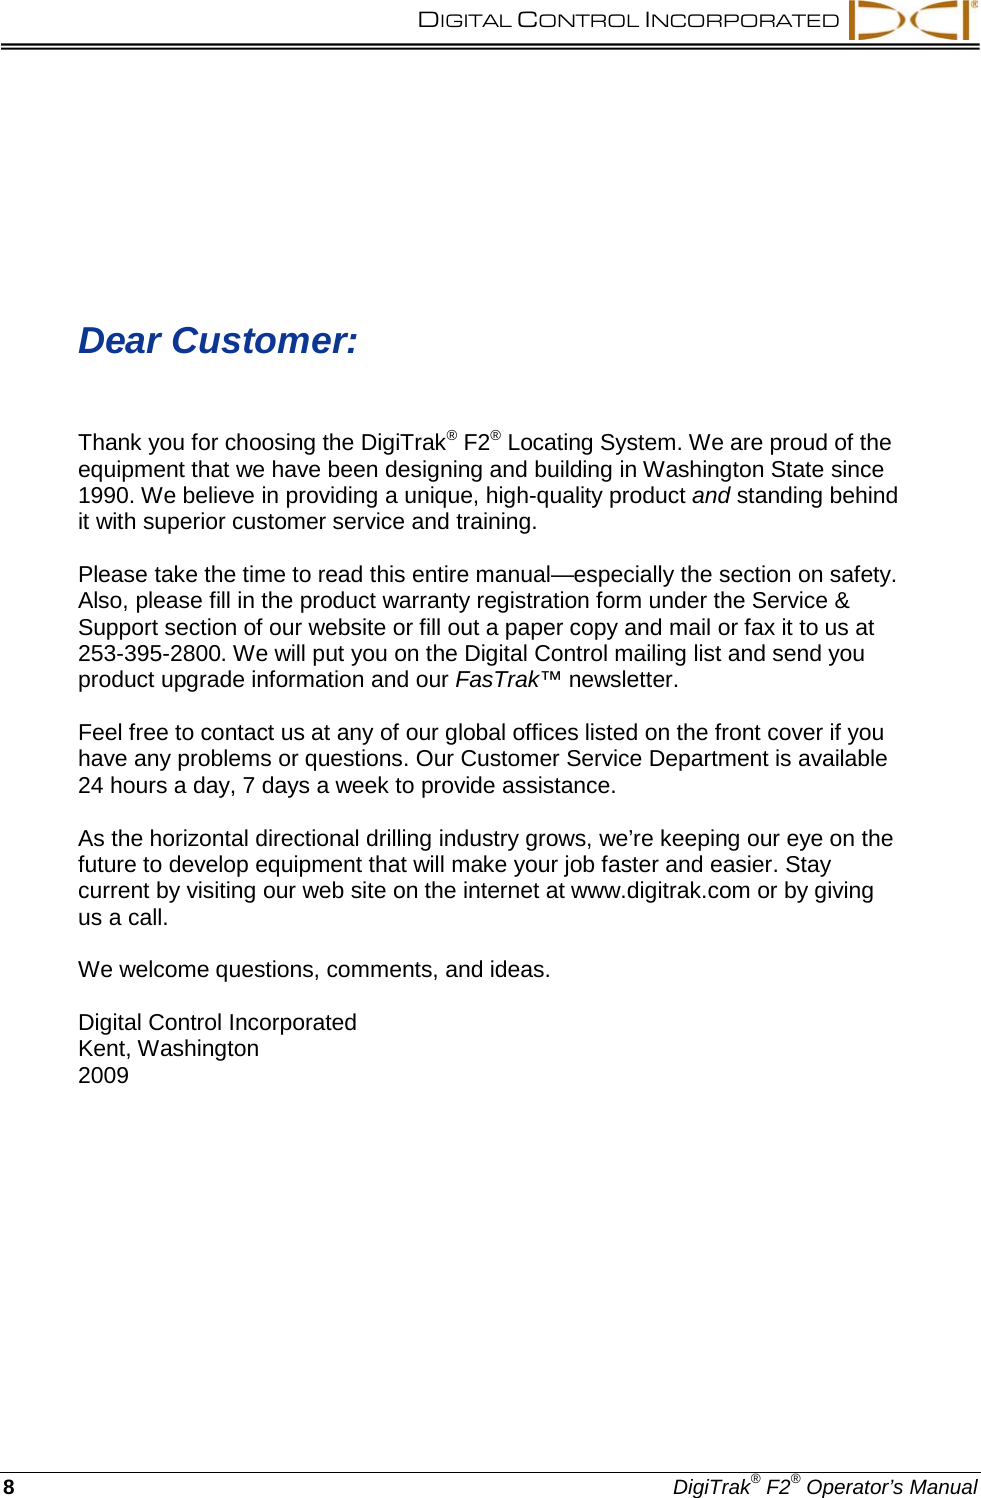 DIGITAL CONTROL INCORPORATED    8  DigiTrak® F2® Operator’s Manual    Dear Customer:  Thank you for choosing the DigiTrak® F2® Locating System. We are proud of the equipment that we have been designing and building in Washington State since 1990. We believe in providing a unique, high-quality product and standing behind it with superior customer service and training.  Please take the time to read this entire manual—especially the section on safety. Also, please fill in the product warranty registration form under the Service &amp; Support section of our website or fill out a paper copy and mail or fax it to us at 253-395-2800. We will put you on the Digital Control mailing list and send you product upgrade information and our FasTrak™ newsletter.  Feel free to contact us at any of our global offices listed on the front cover if you have any problems or questions. Our Customer Service Department is available 24 hours a day, 7 days a week to provide assistance.  As the horizontal directional drilling industry grows, we’re keeping our eye on the future to develop equipment that will make your job faster and easier. Stay current by visiting our web site on the internet at www.digitrak.com or by giving us a call.  We welcome questions, comments, and ideas.  Digital Control Incorporated Kent, Washington 2009    